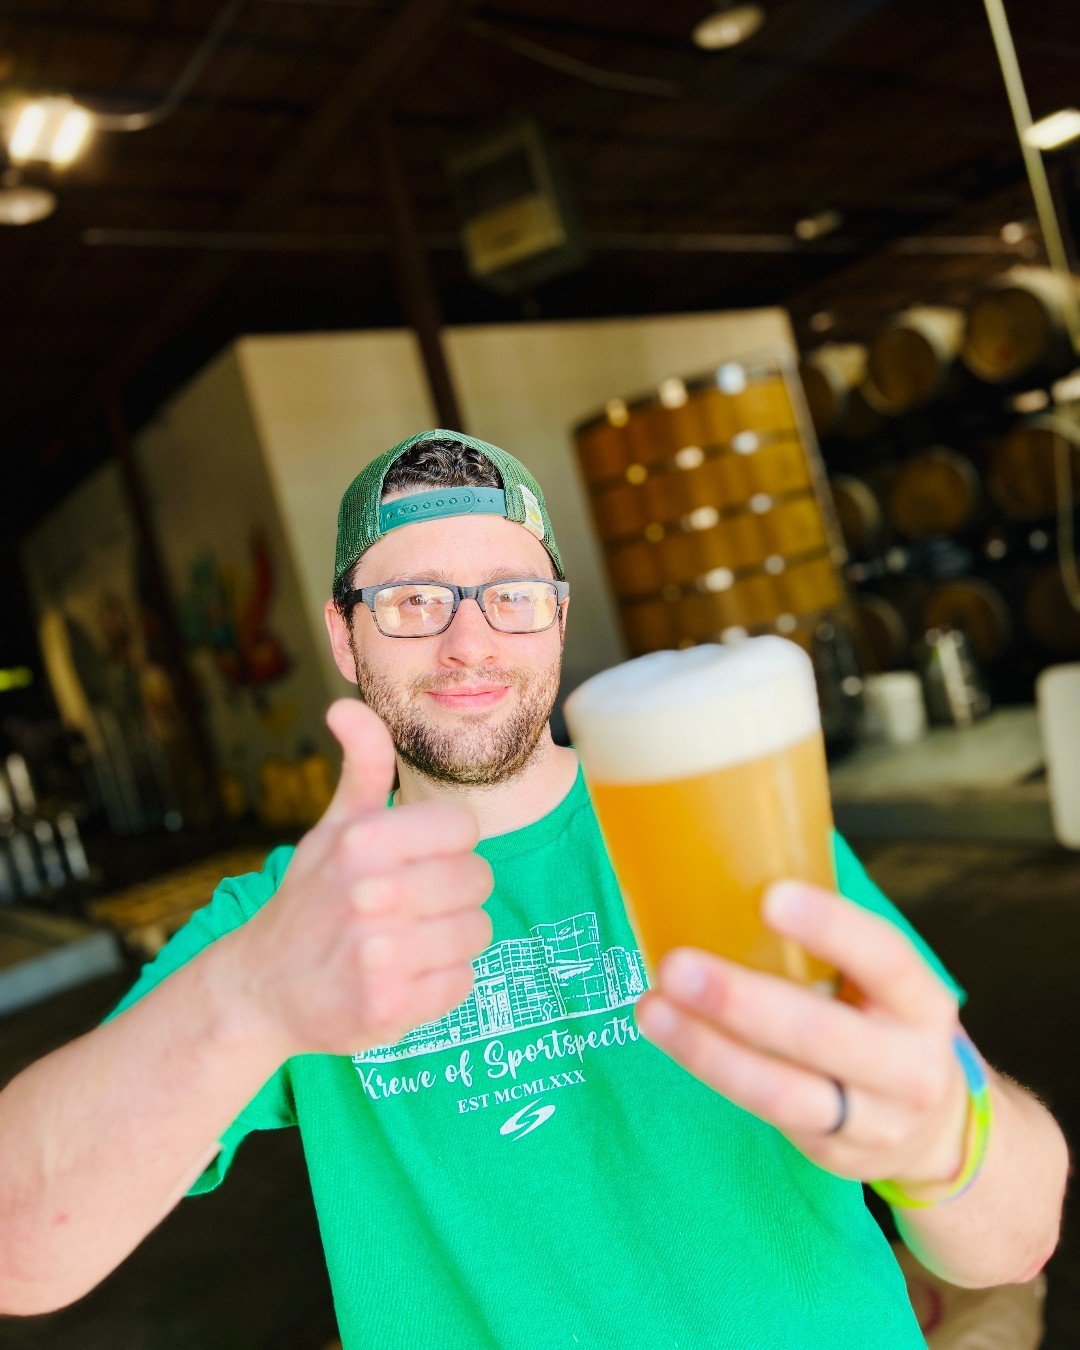 We've got a new pilot IPA for y'all to try tomorrow. Brewed by cellerman James French. 

&ldquo;It&rsquo;s Business Time&rdquo; is a sessionable and crisp SMASH (Single Malt, Single Hop) IPA. Using Pure Idaho Pilsner malt and Nelson Sauvin hops, we h